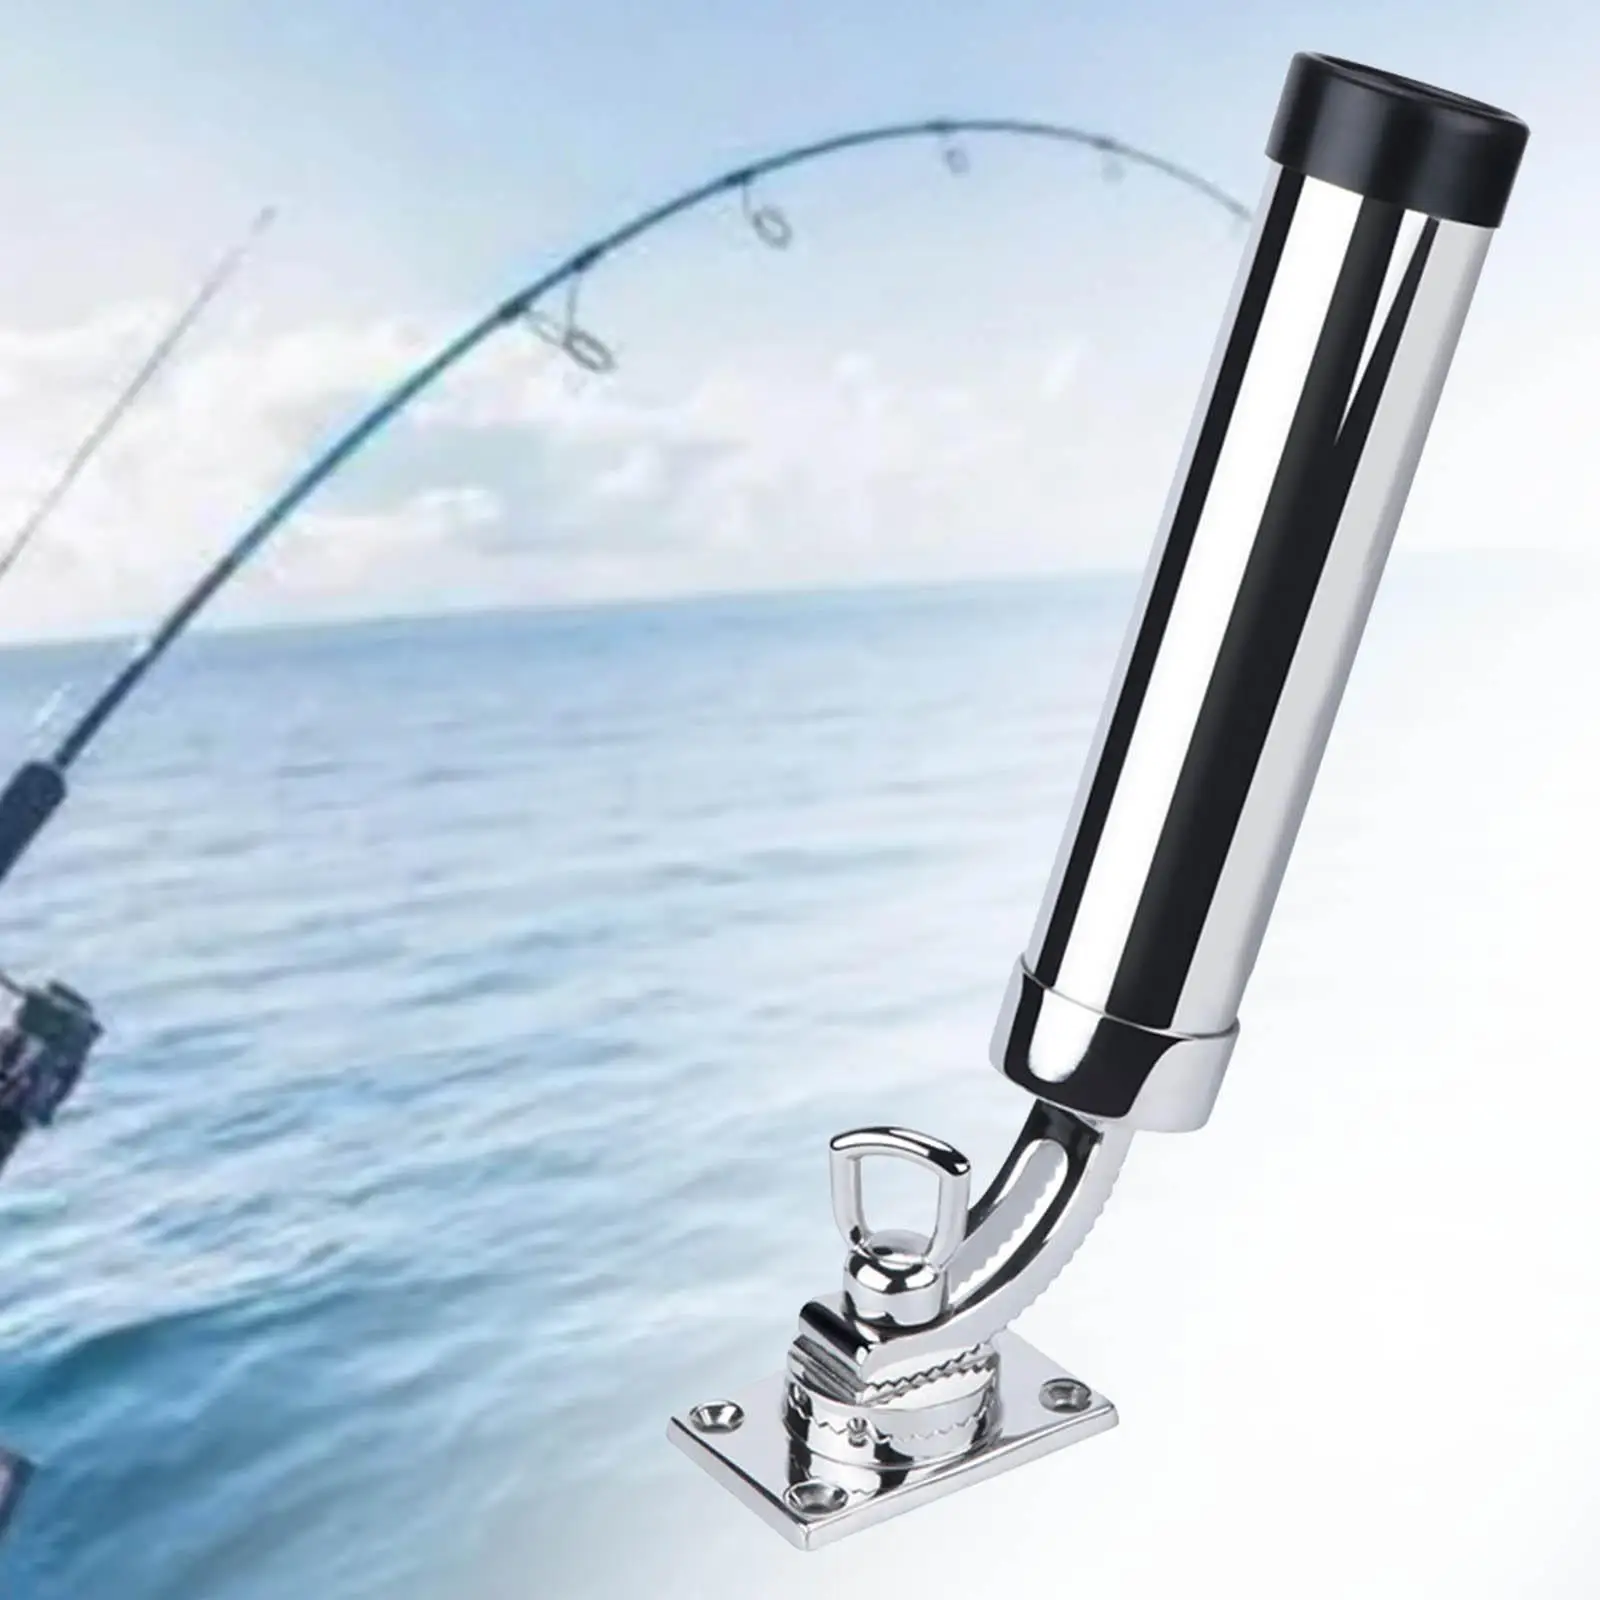 Fishing Rod Rack Holder Stainless Steel on Easy Install Boat Accessories Hardware Clamp on Rod Holder Fishing Pole Holder